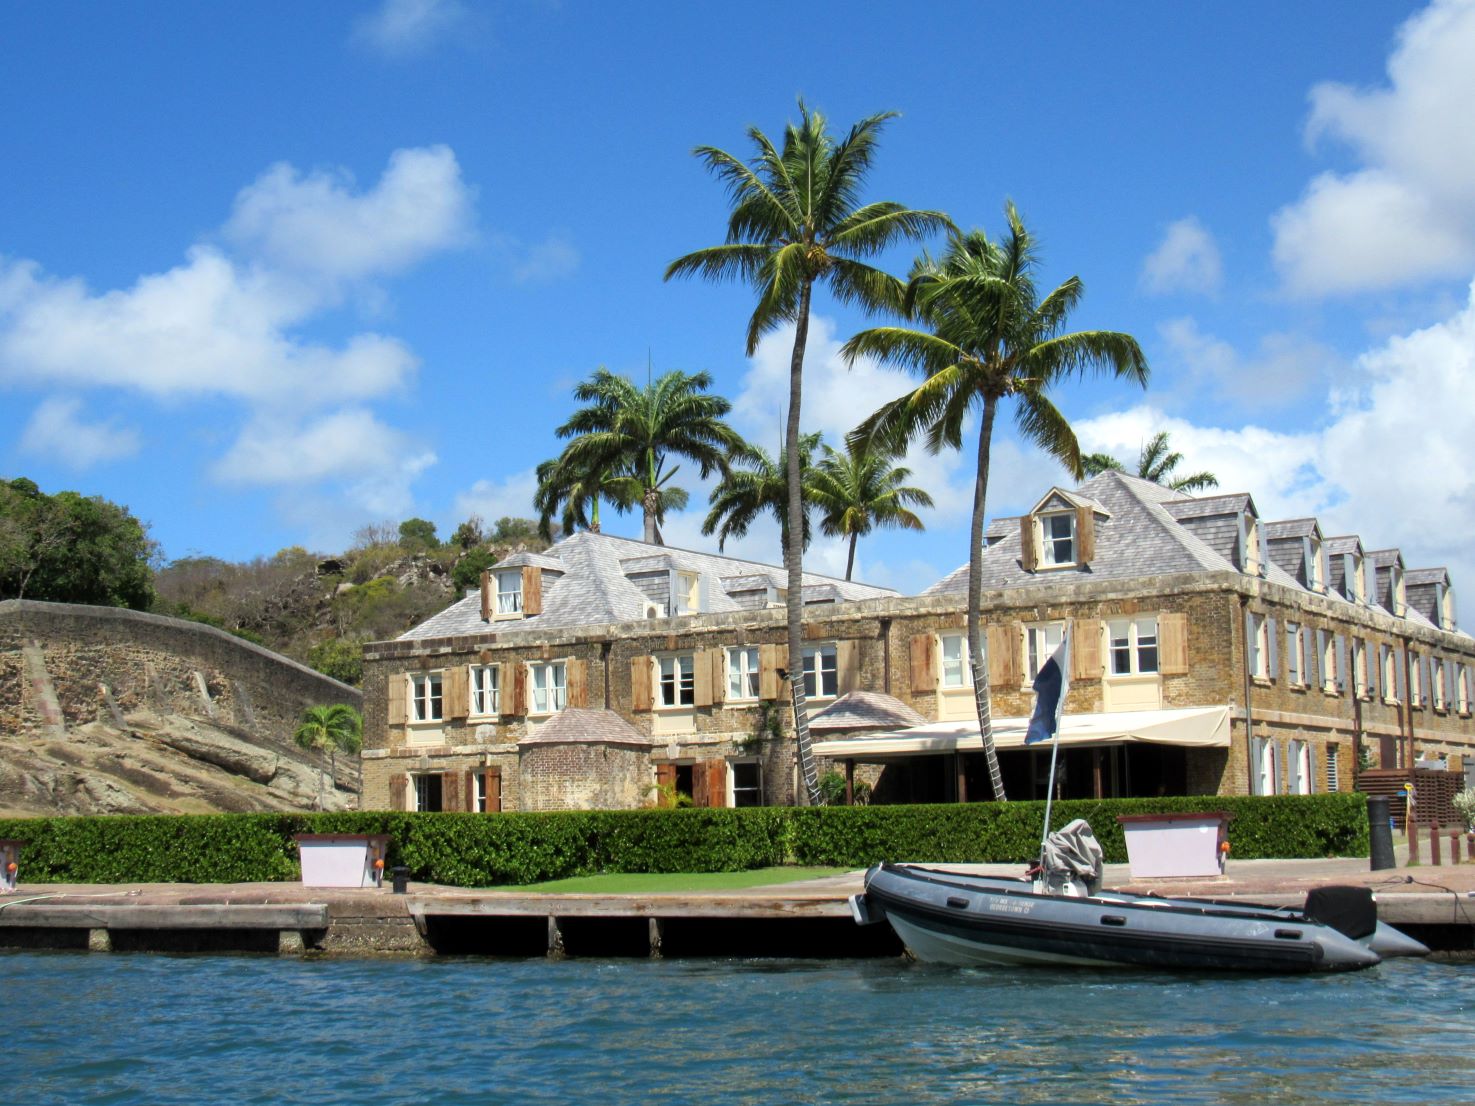 view of dock and context